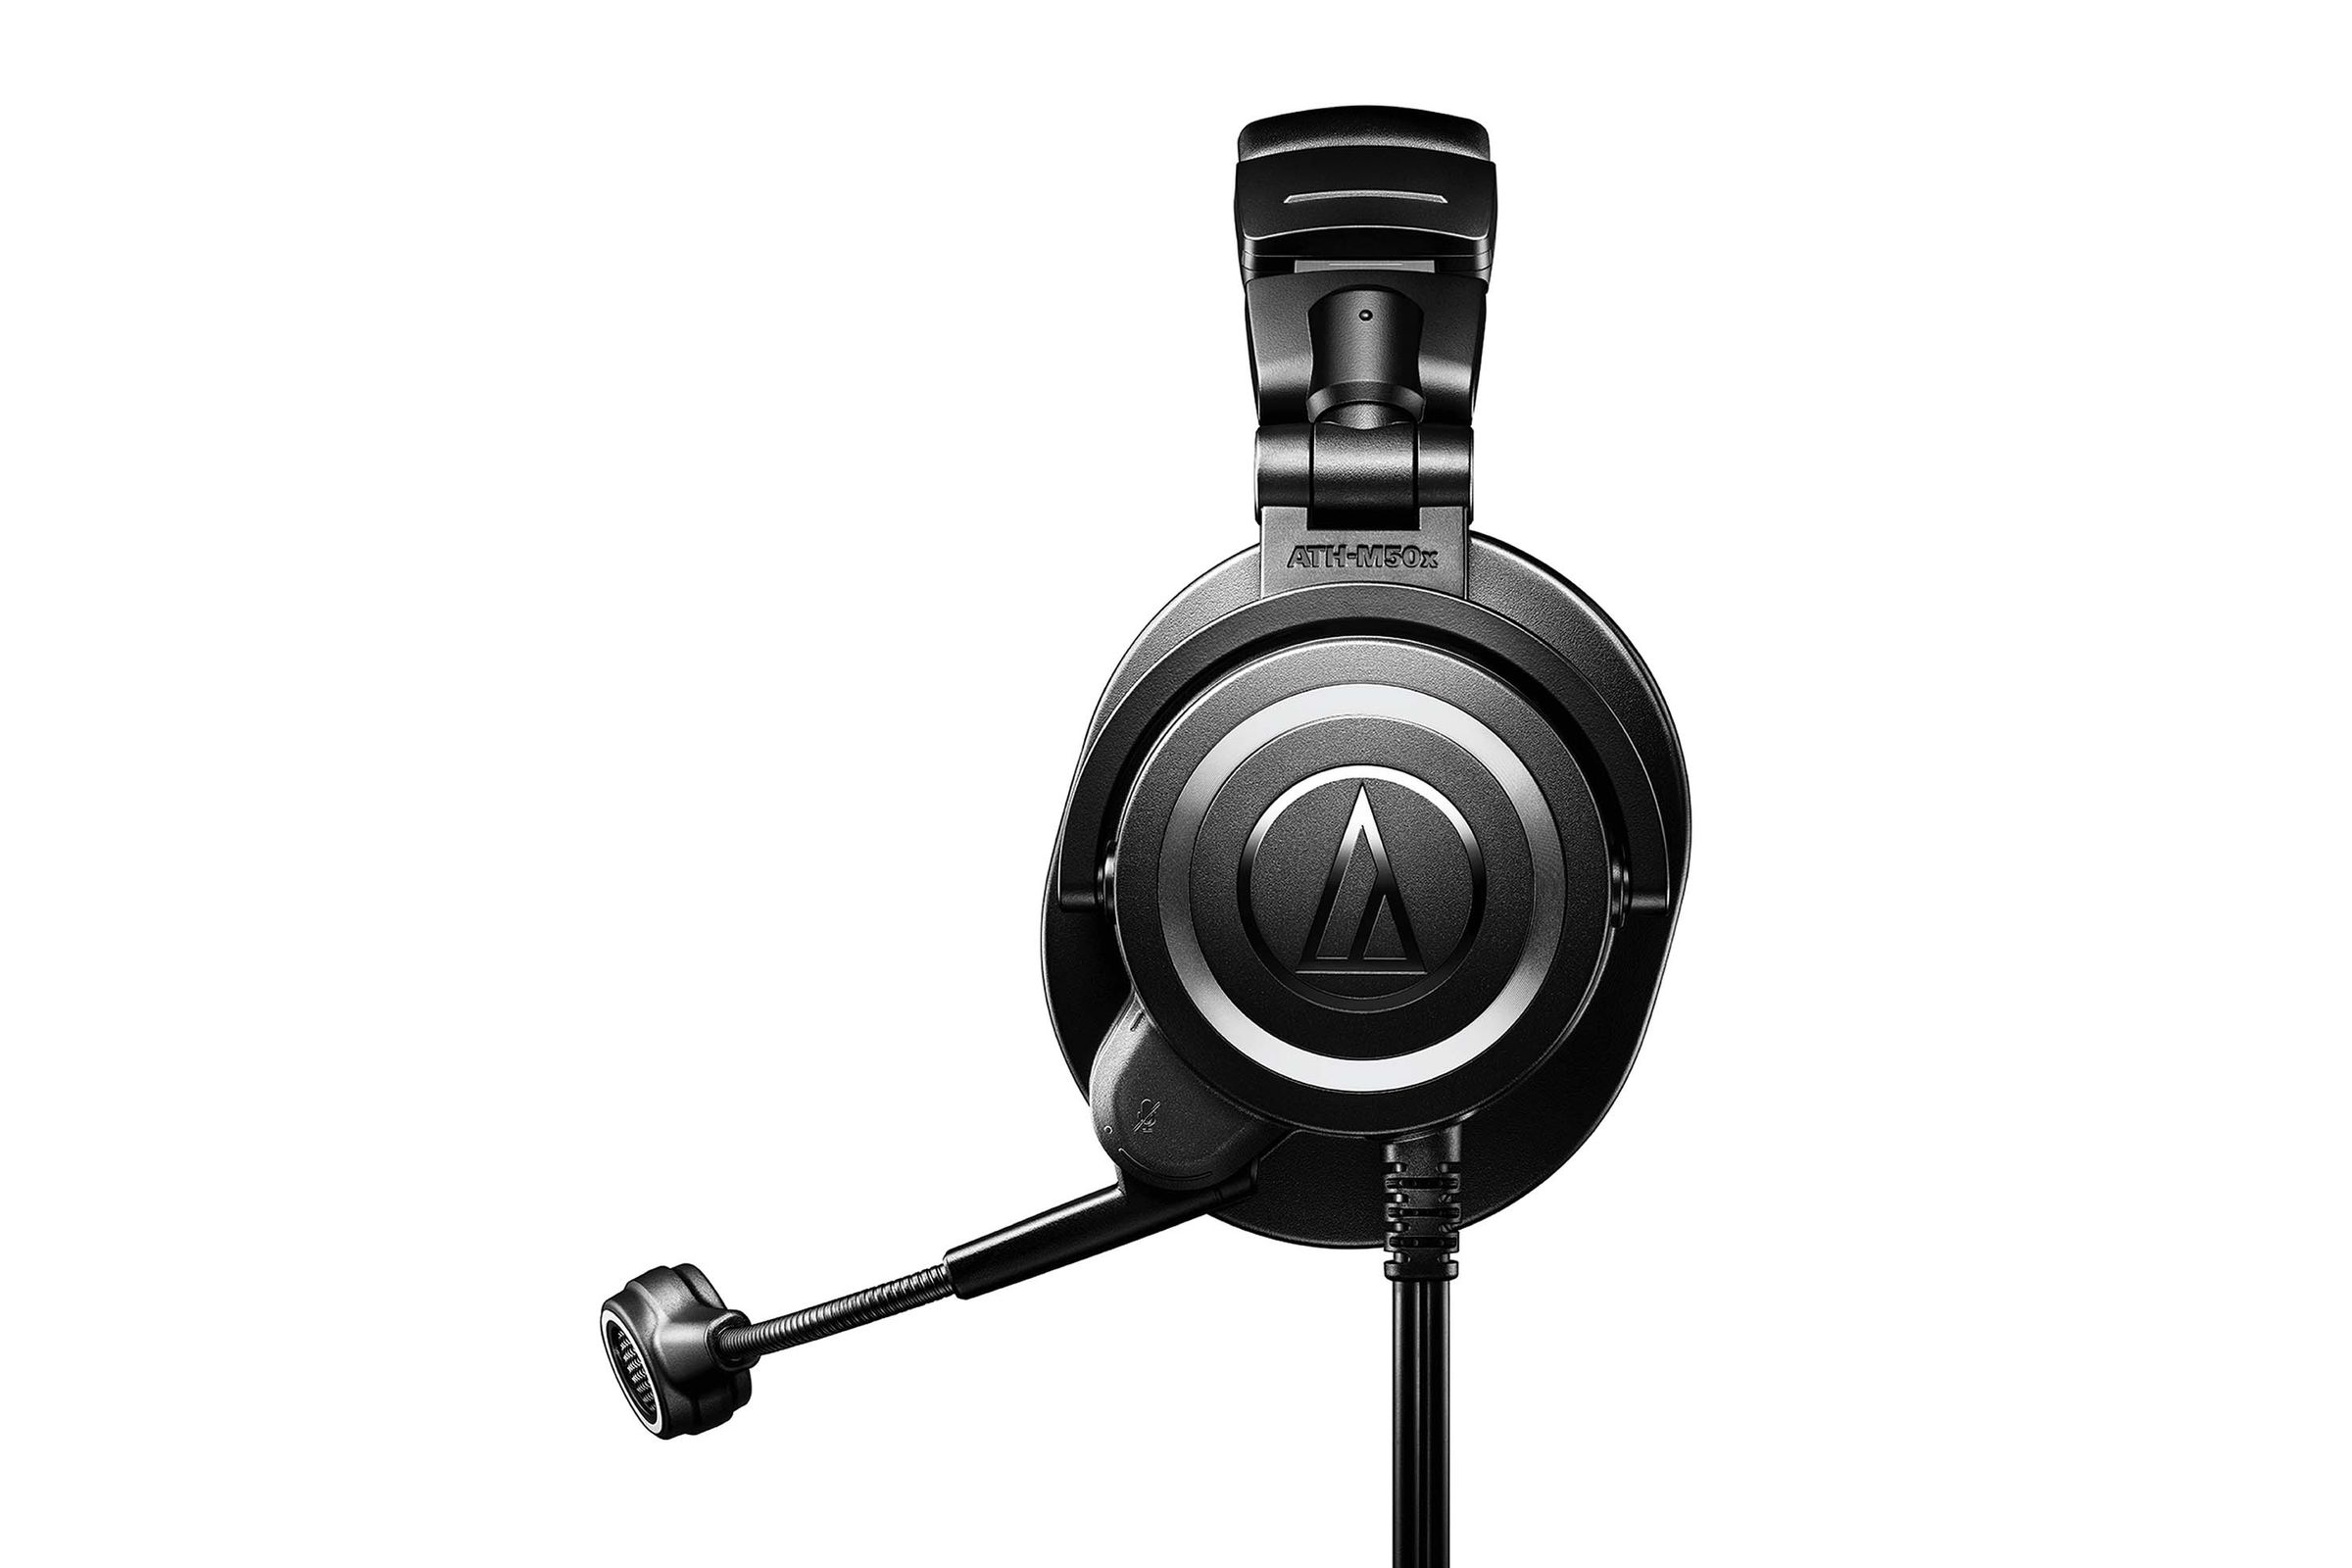 Audio Technica headset from the side.